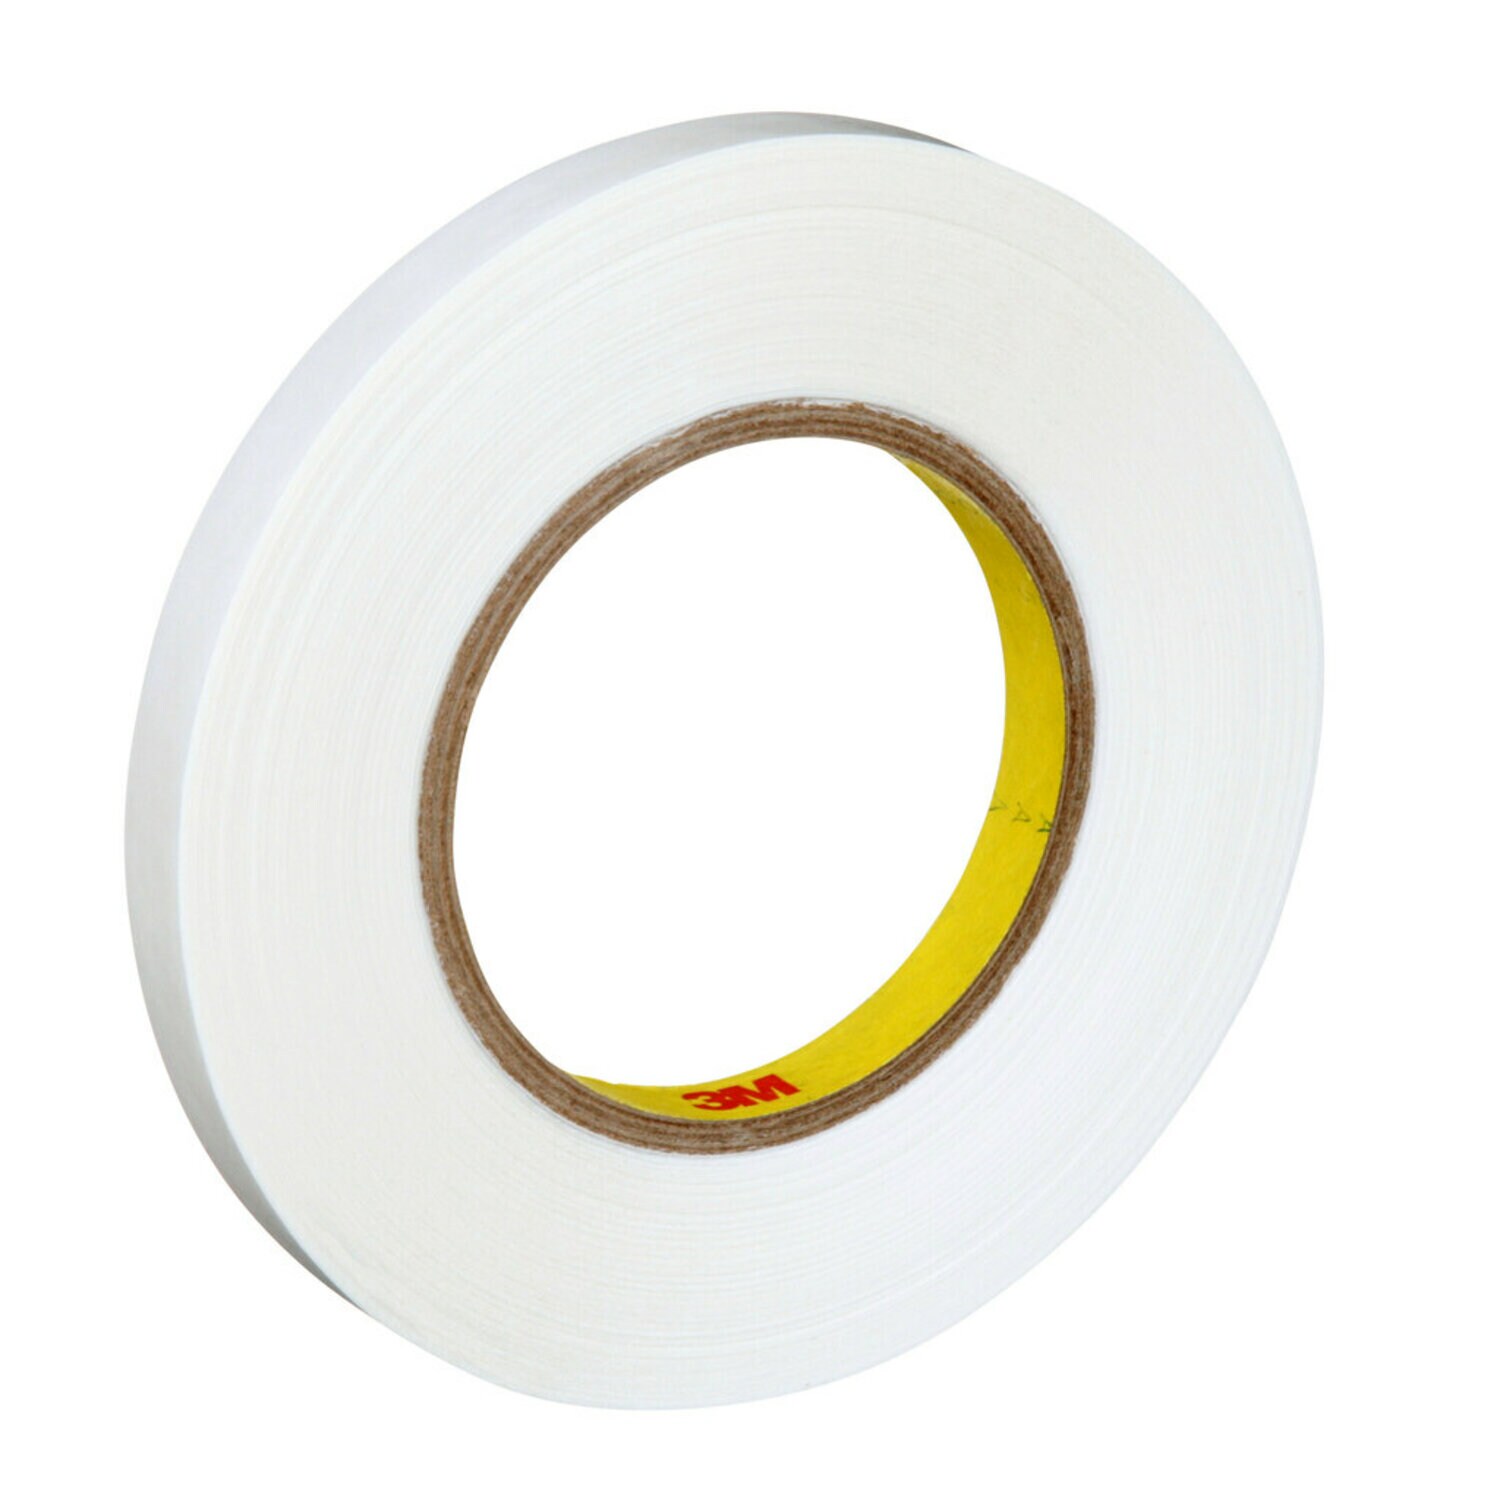 7000123508 - 3M Double Coated Tape 9579, White, 1/2 in x 36 yd, 9 mil, 72 rolls per
case